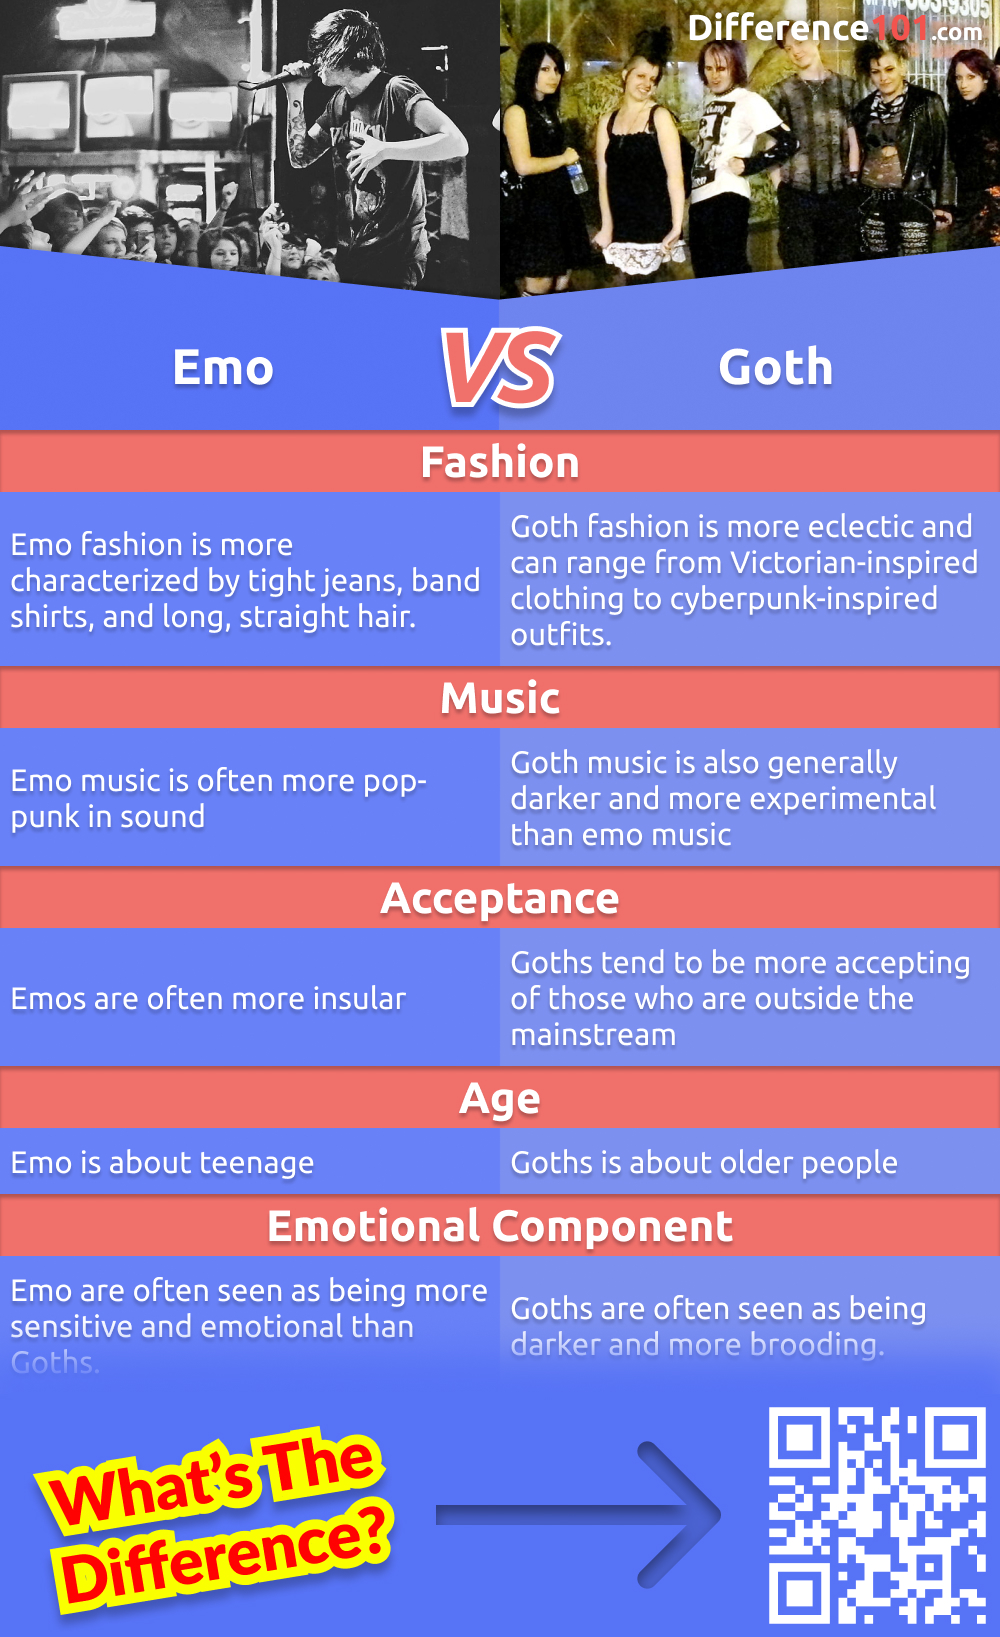 Emo and Goth are two popular subcultures that often get lumped together. But what are the differences between the two? This article will explore the pros and cons of each subculture and their key differences.